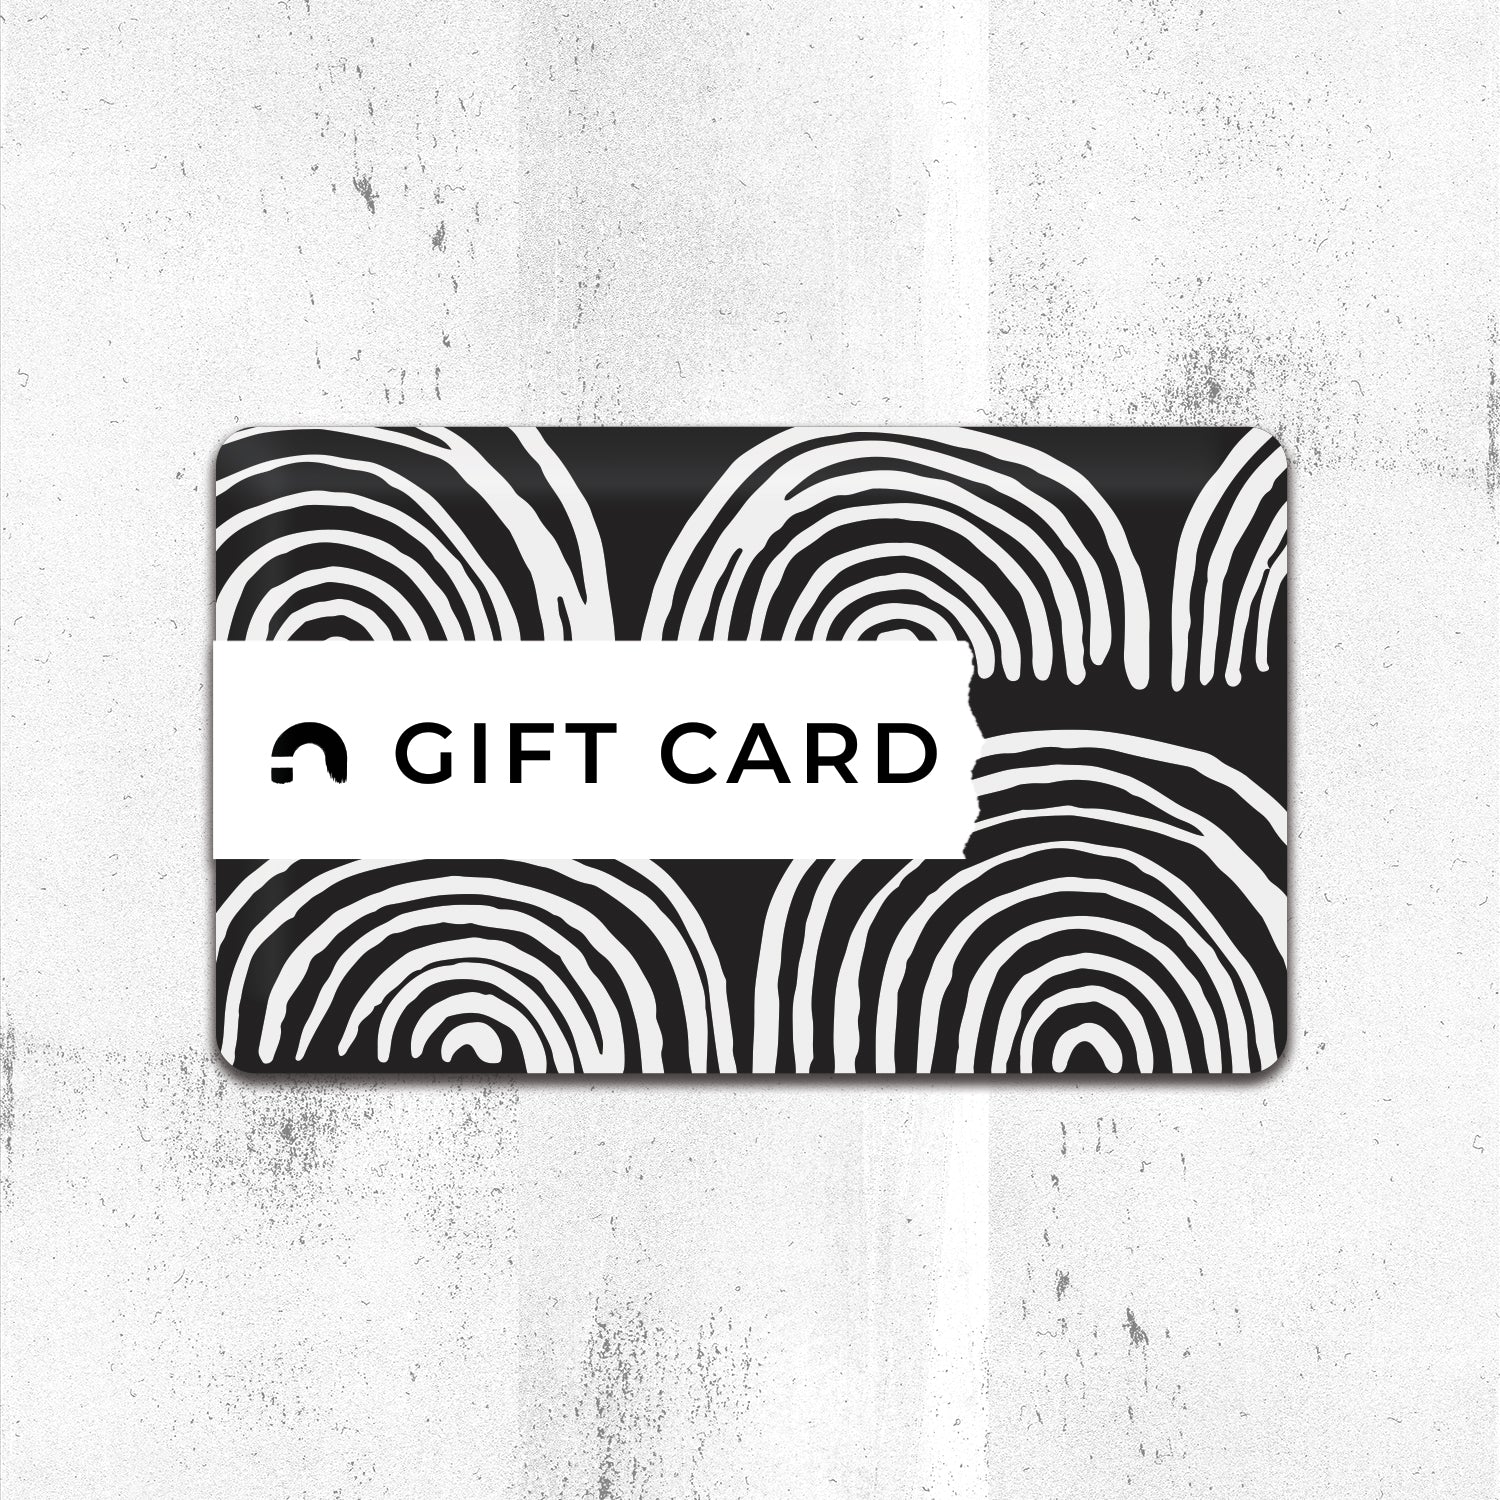 RAGS - 'Gift Card'